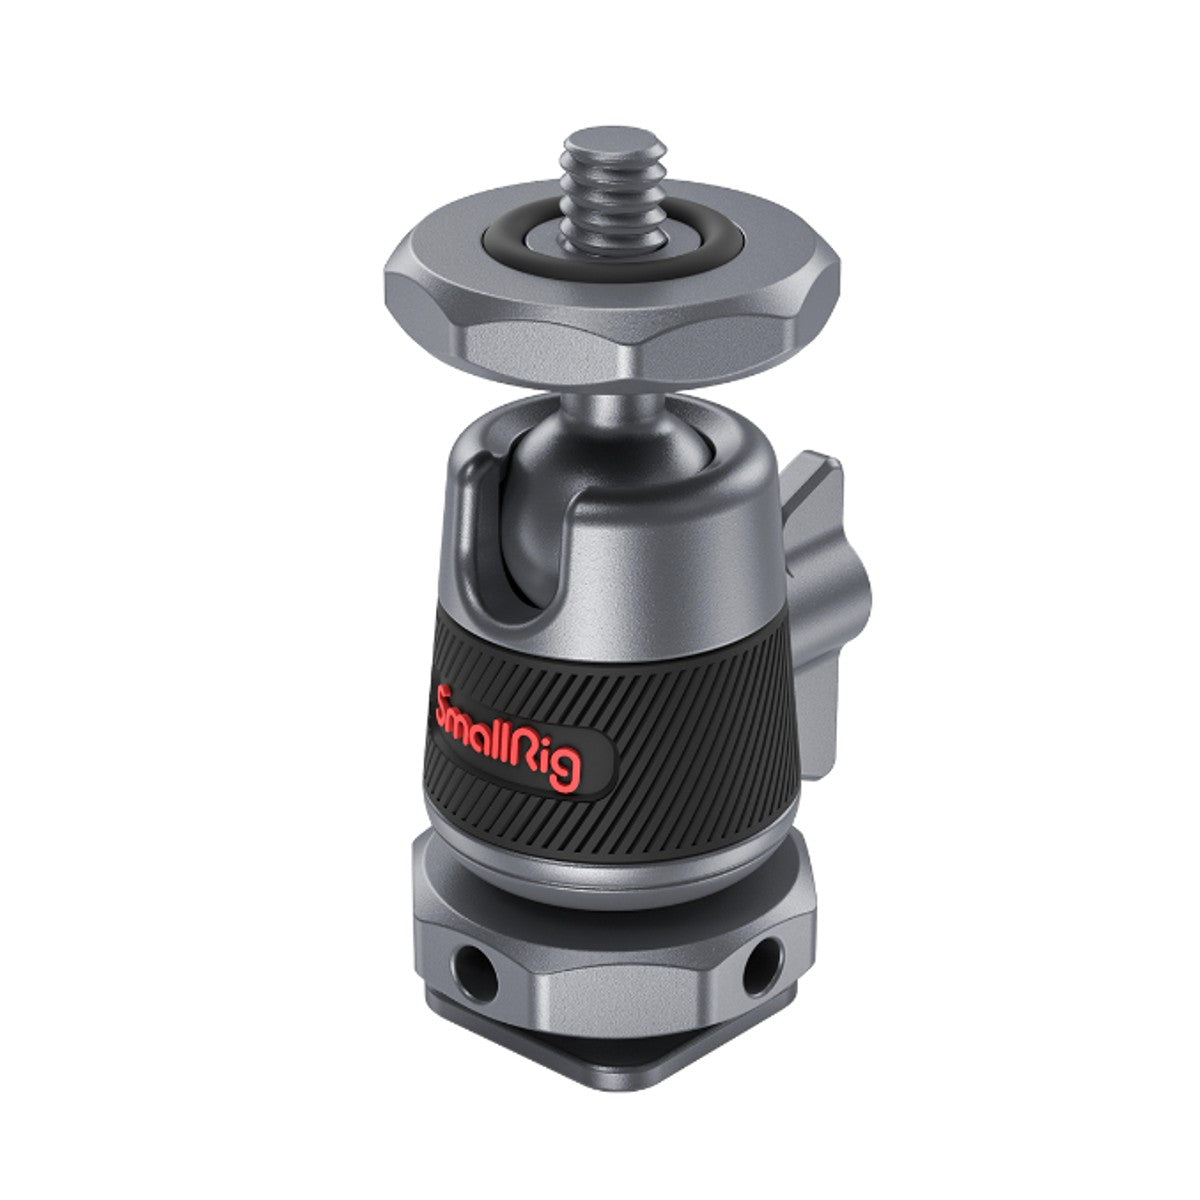 SmallRig Mini Ball Head with Removable Cold Shoe Mount